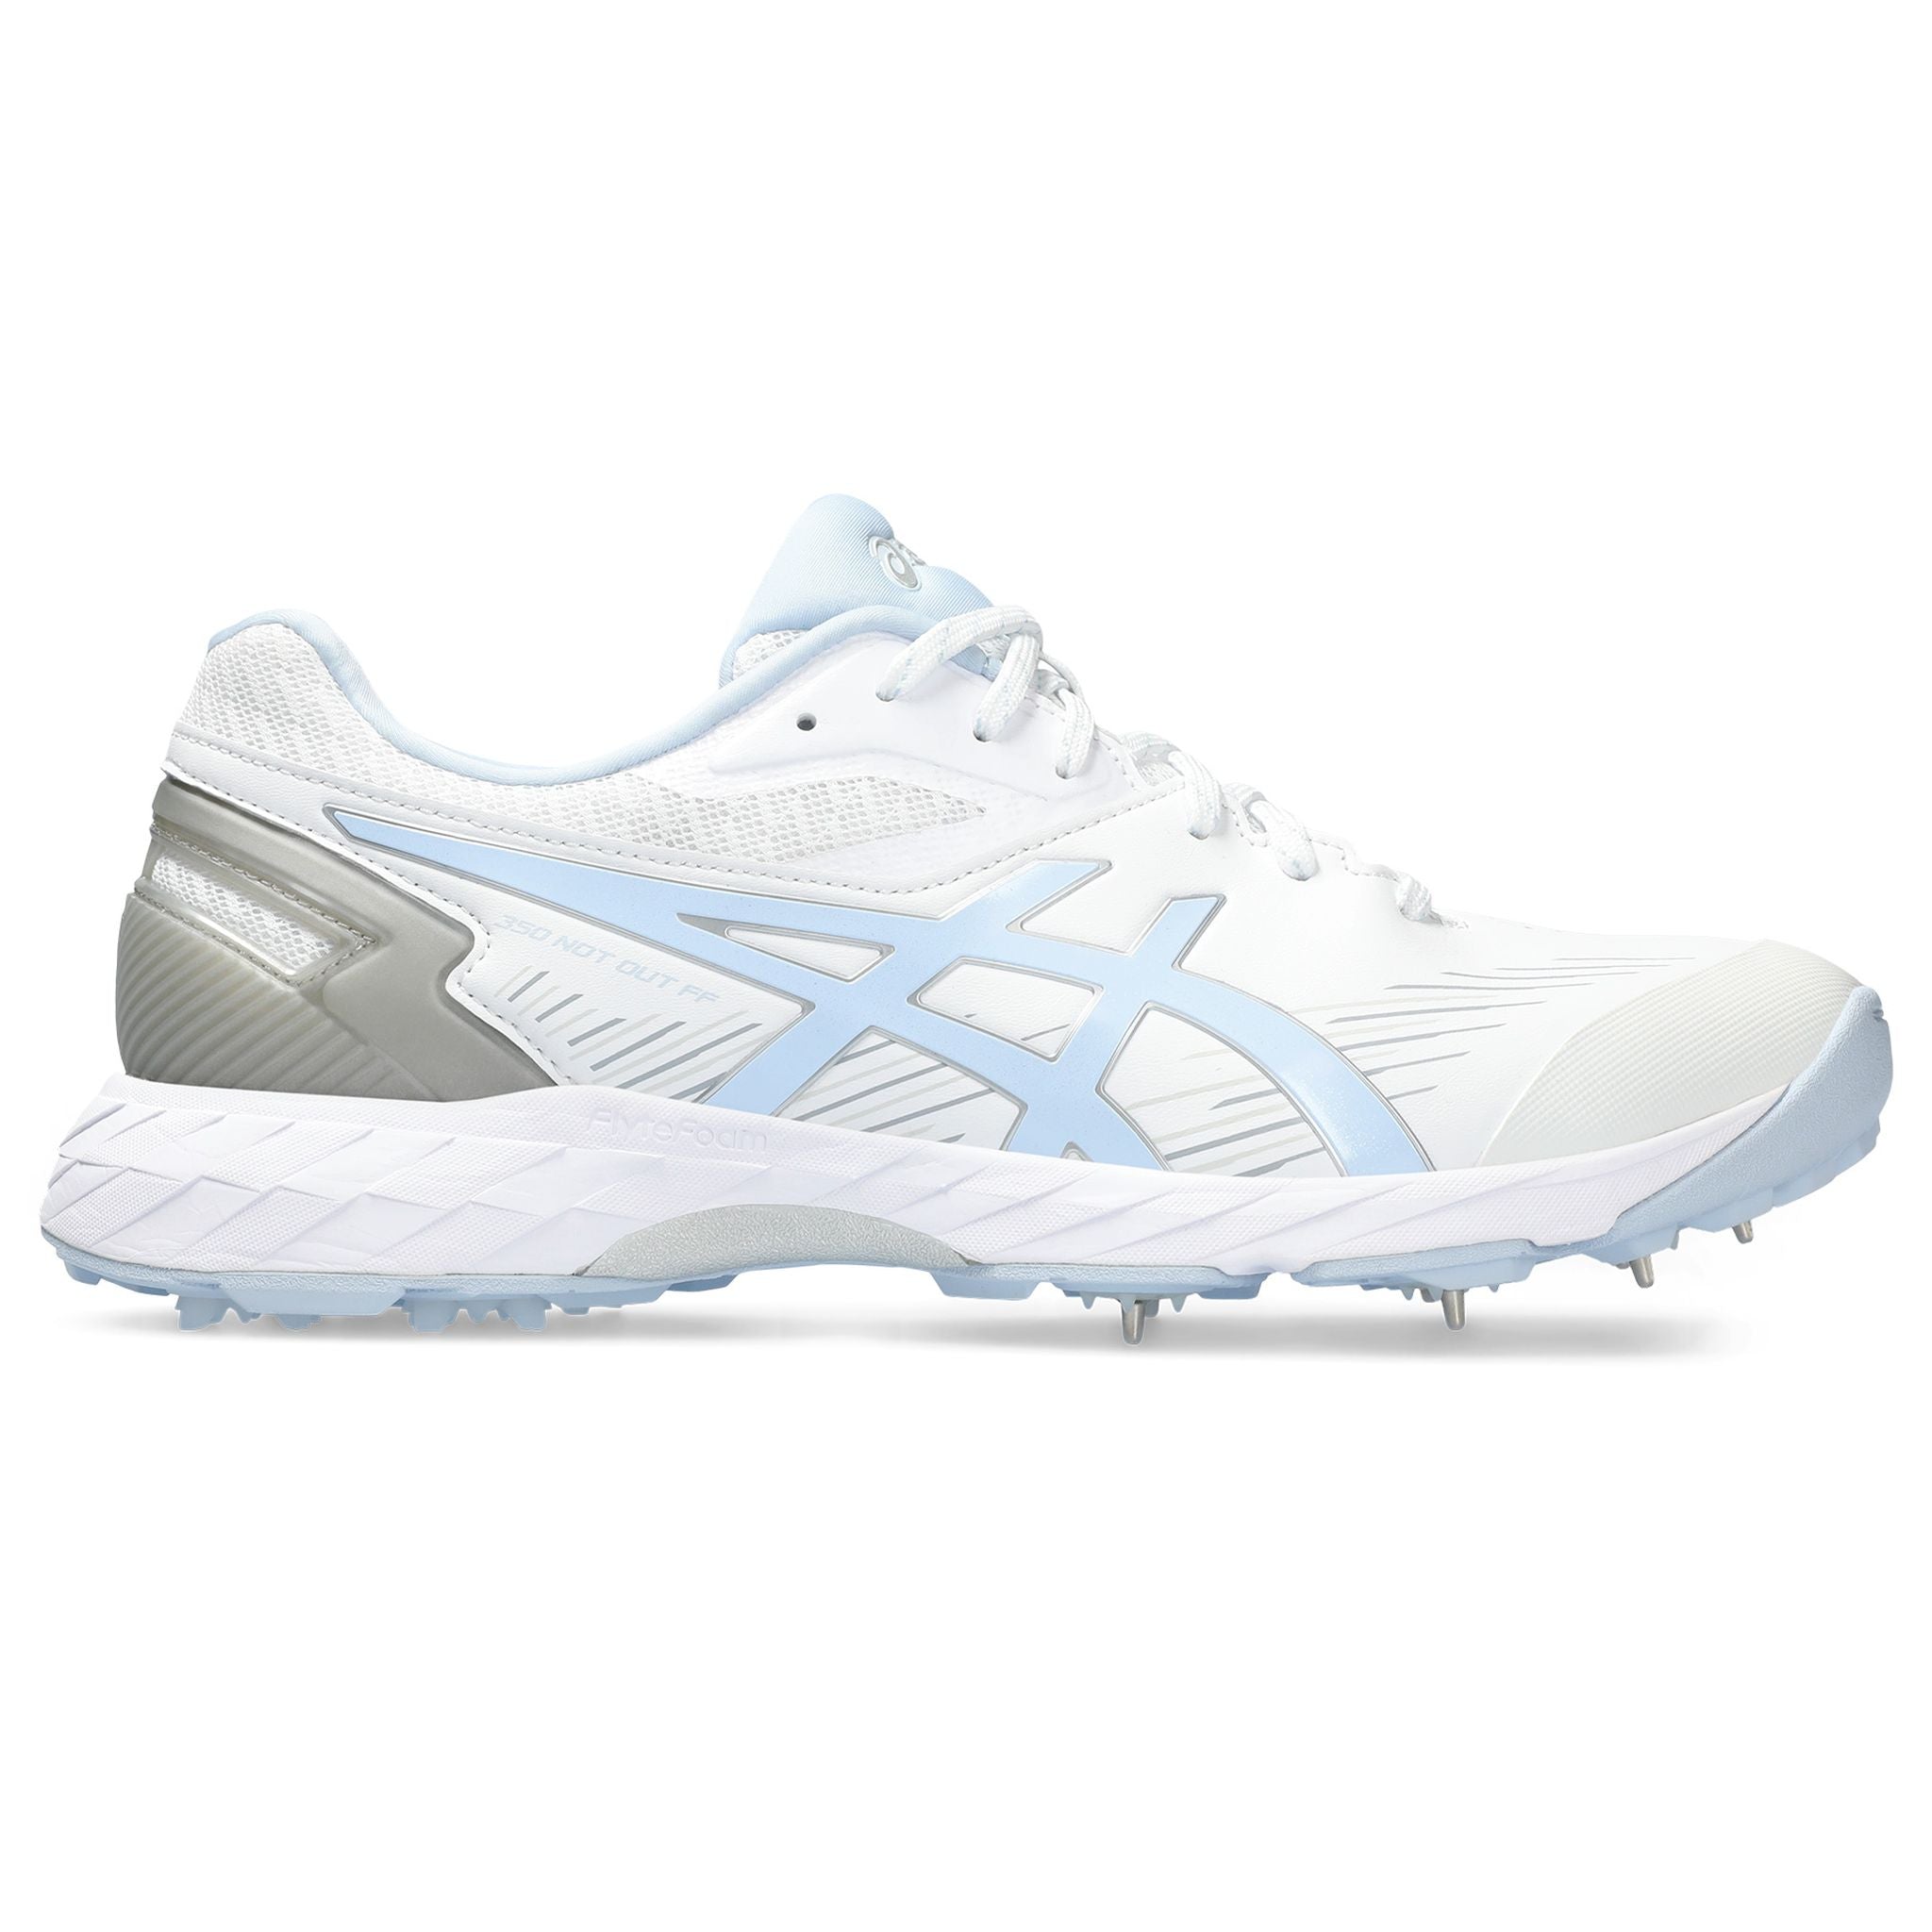 ASICS 350 Not Out FF Womens Cricket Shoe